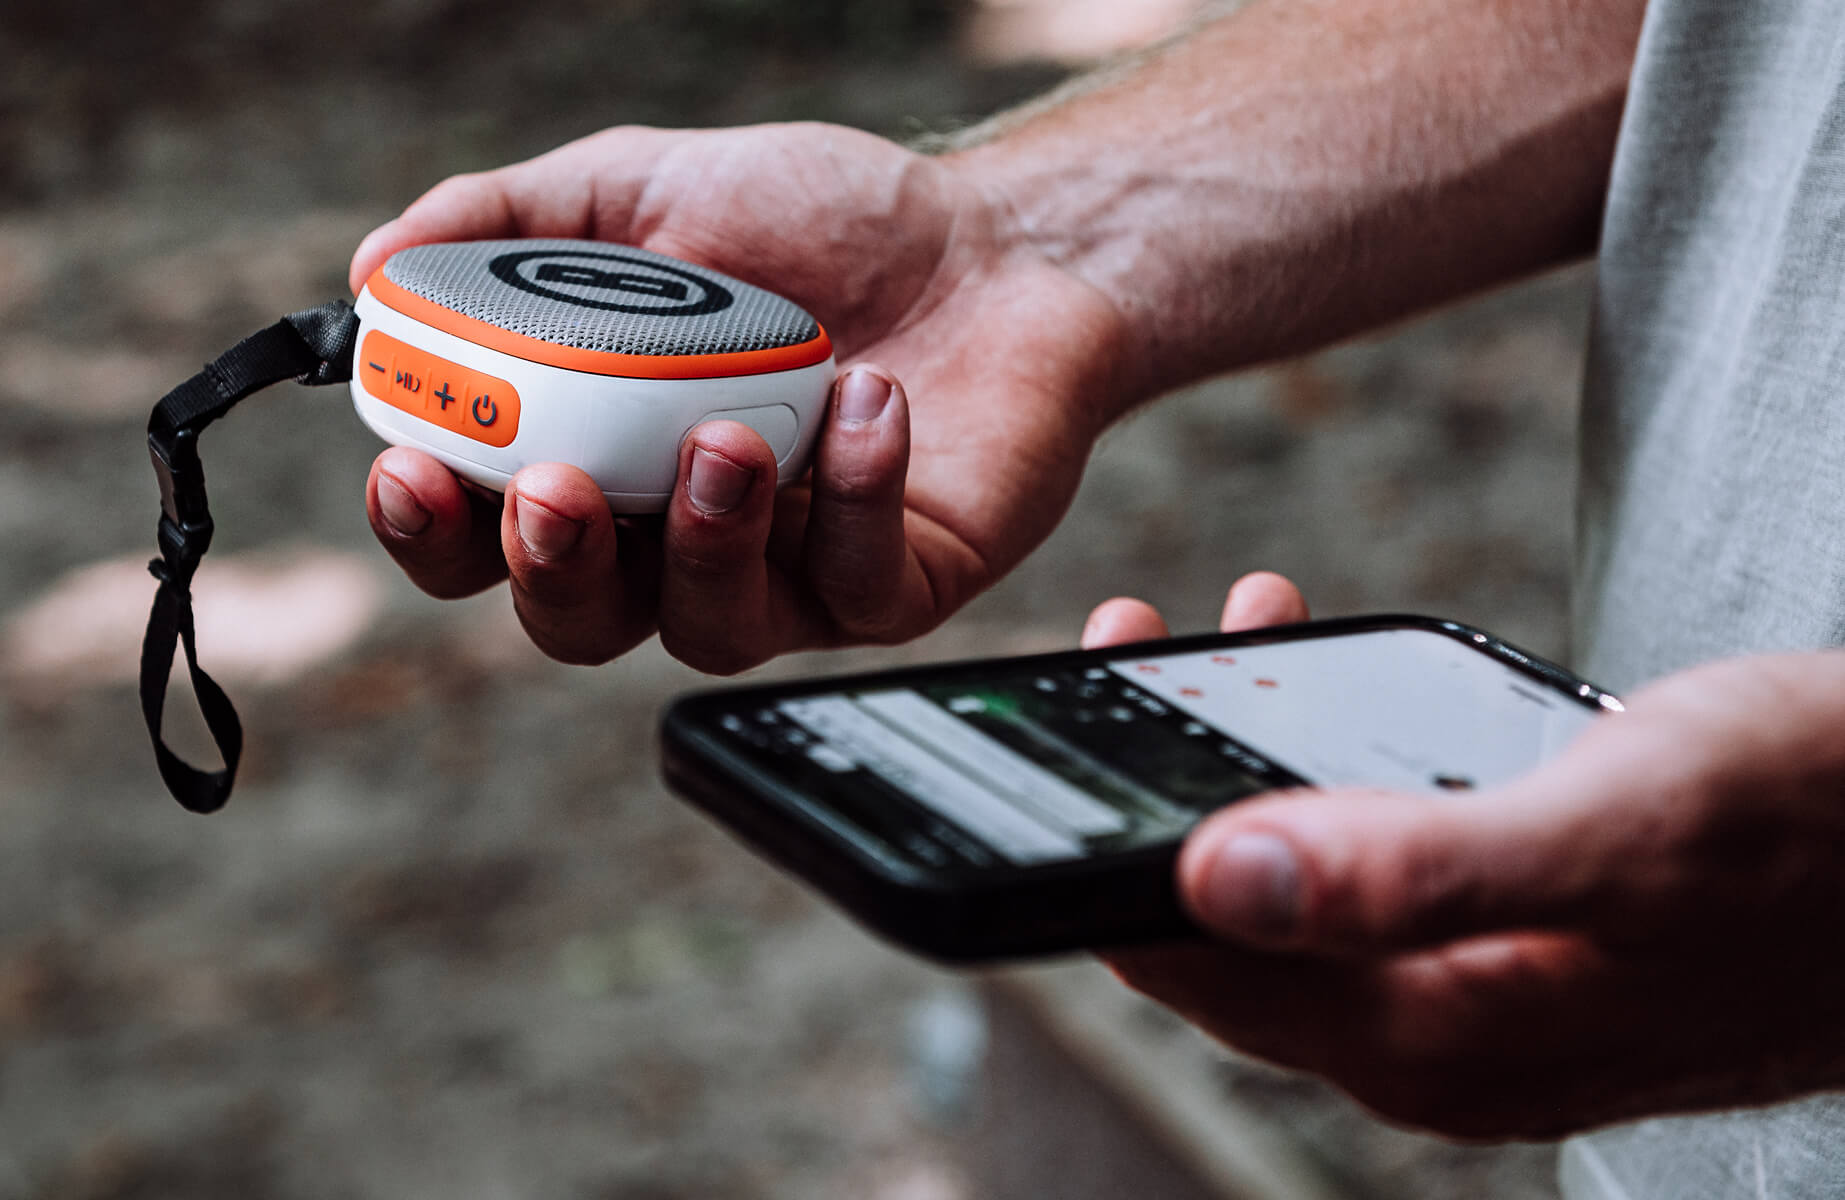 Bushnell Disc Jockey being used with UDisc App